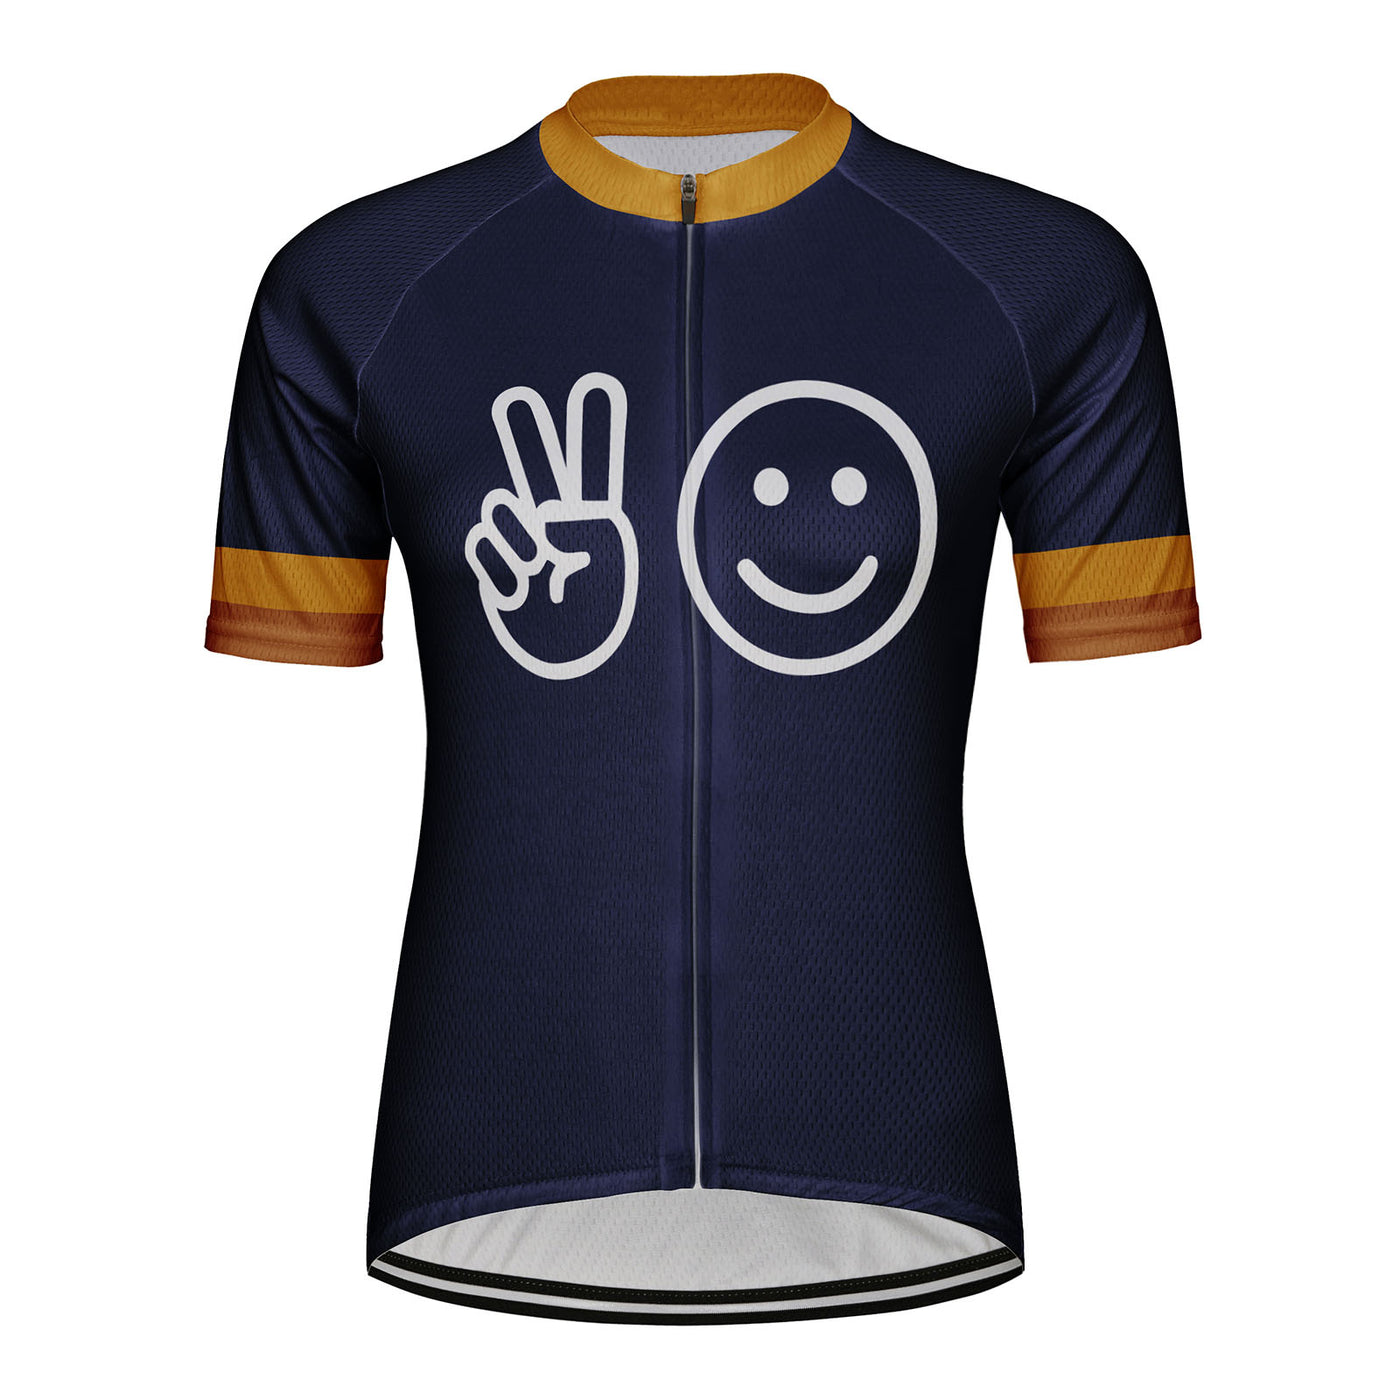 Customized Smile Women's Cycling Jersey Short Sleeve